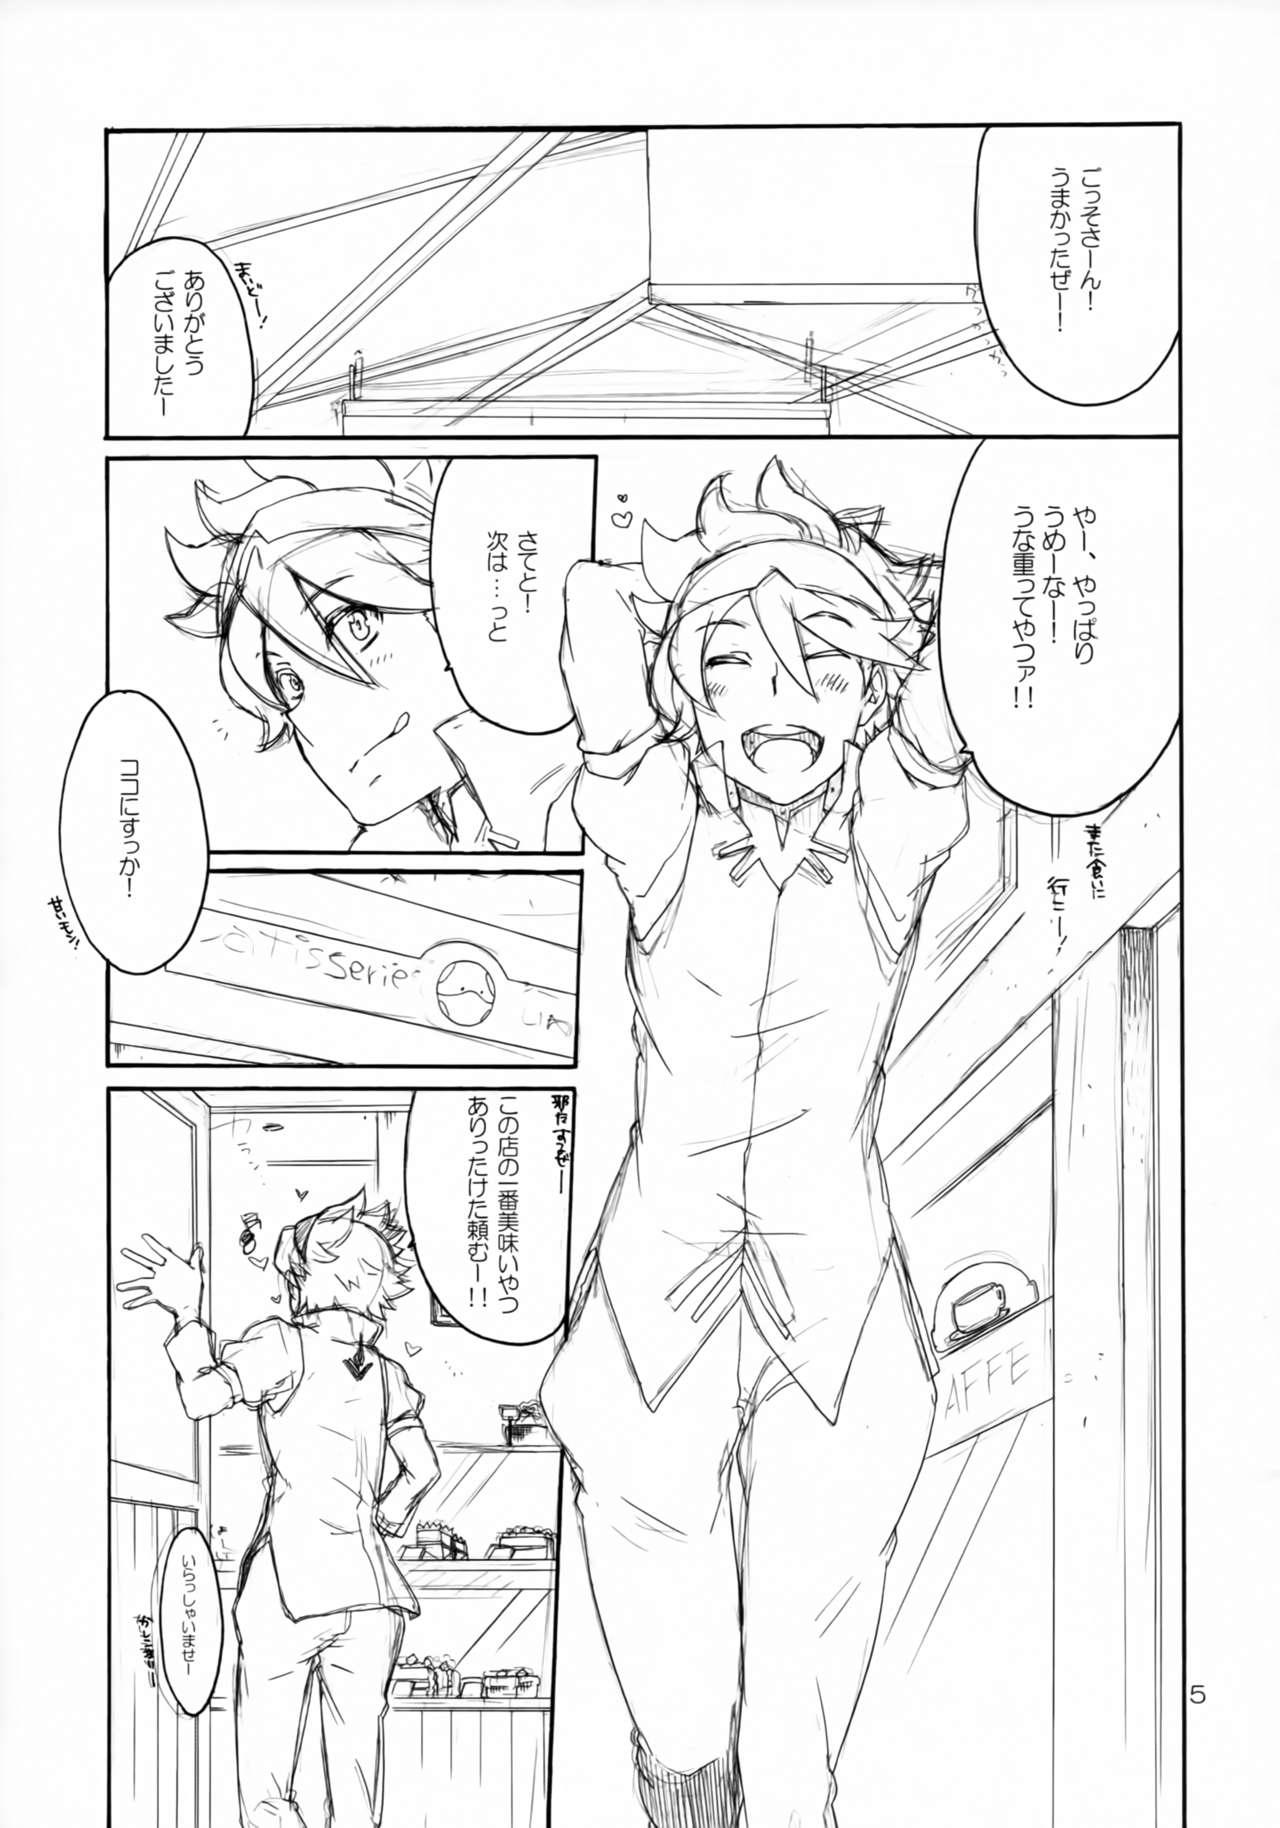 Pain sweets panic - Gundam build fighters Amateur Pussy - Page 4